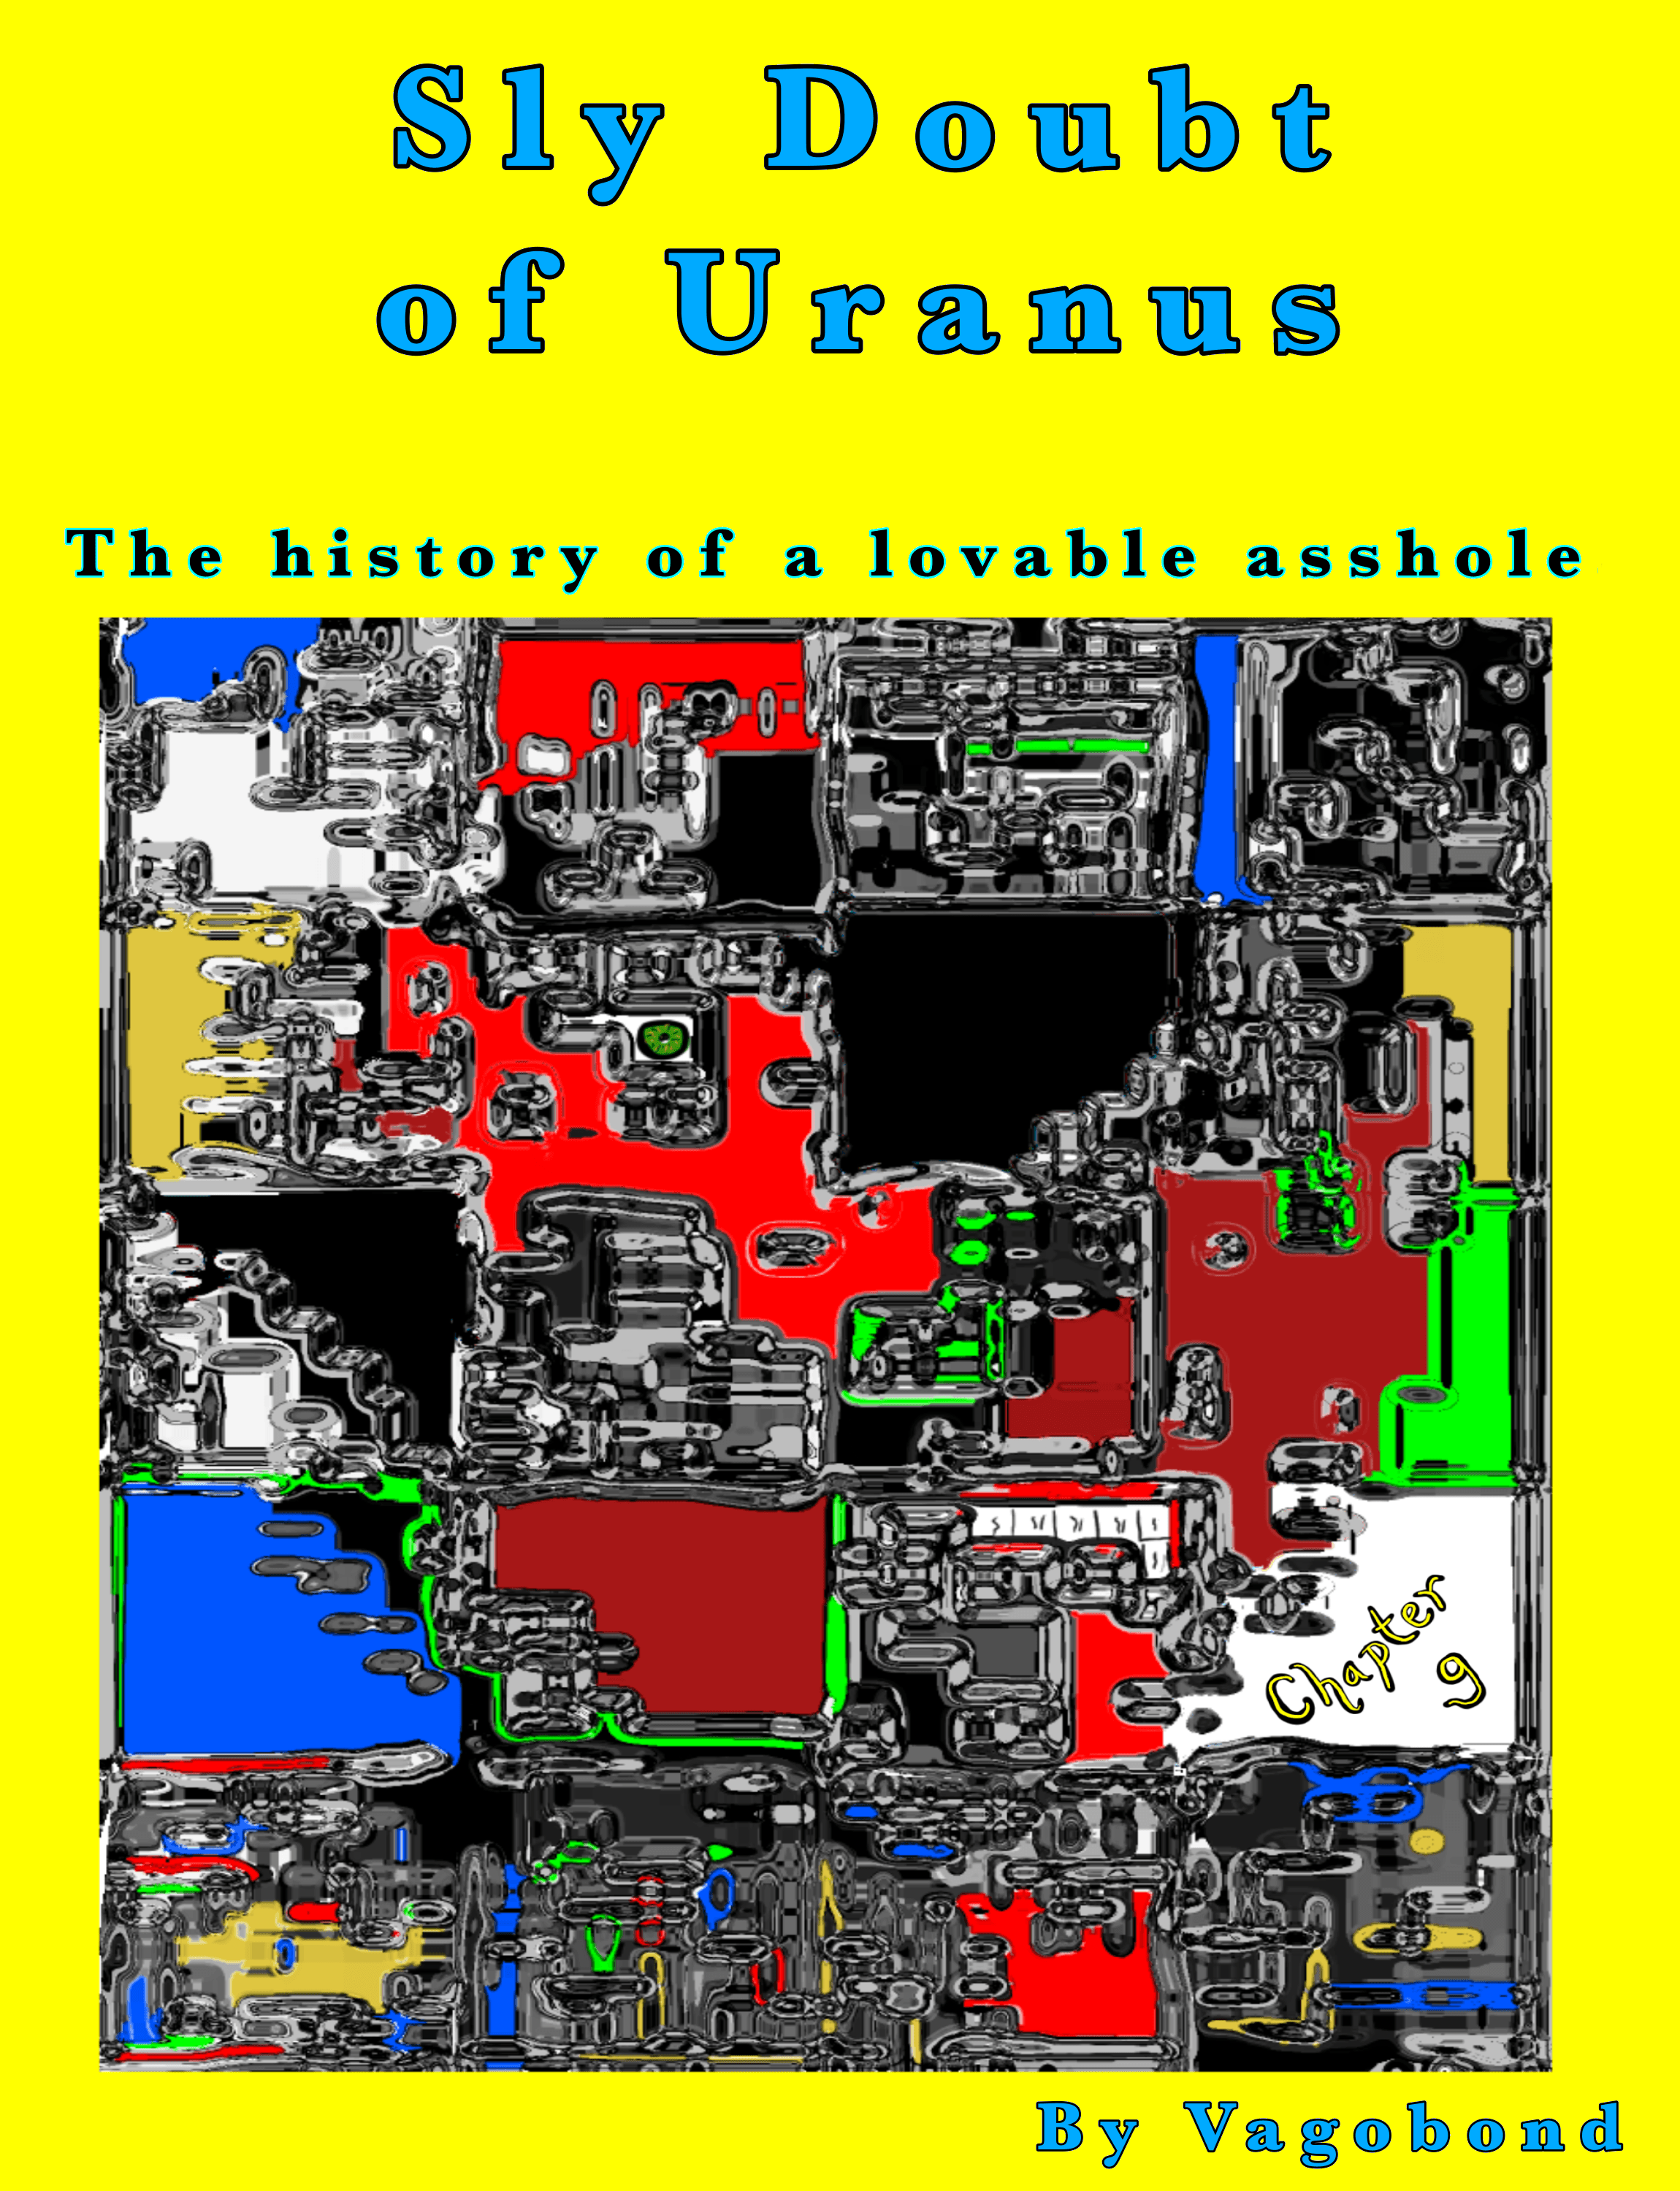 Sly Doubt of Uranus: The History of a Lovable Asshole - Chapter 9: 1st Edition